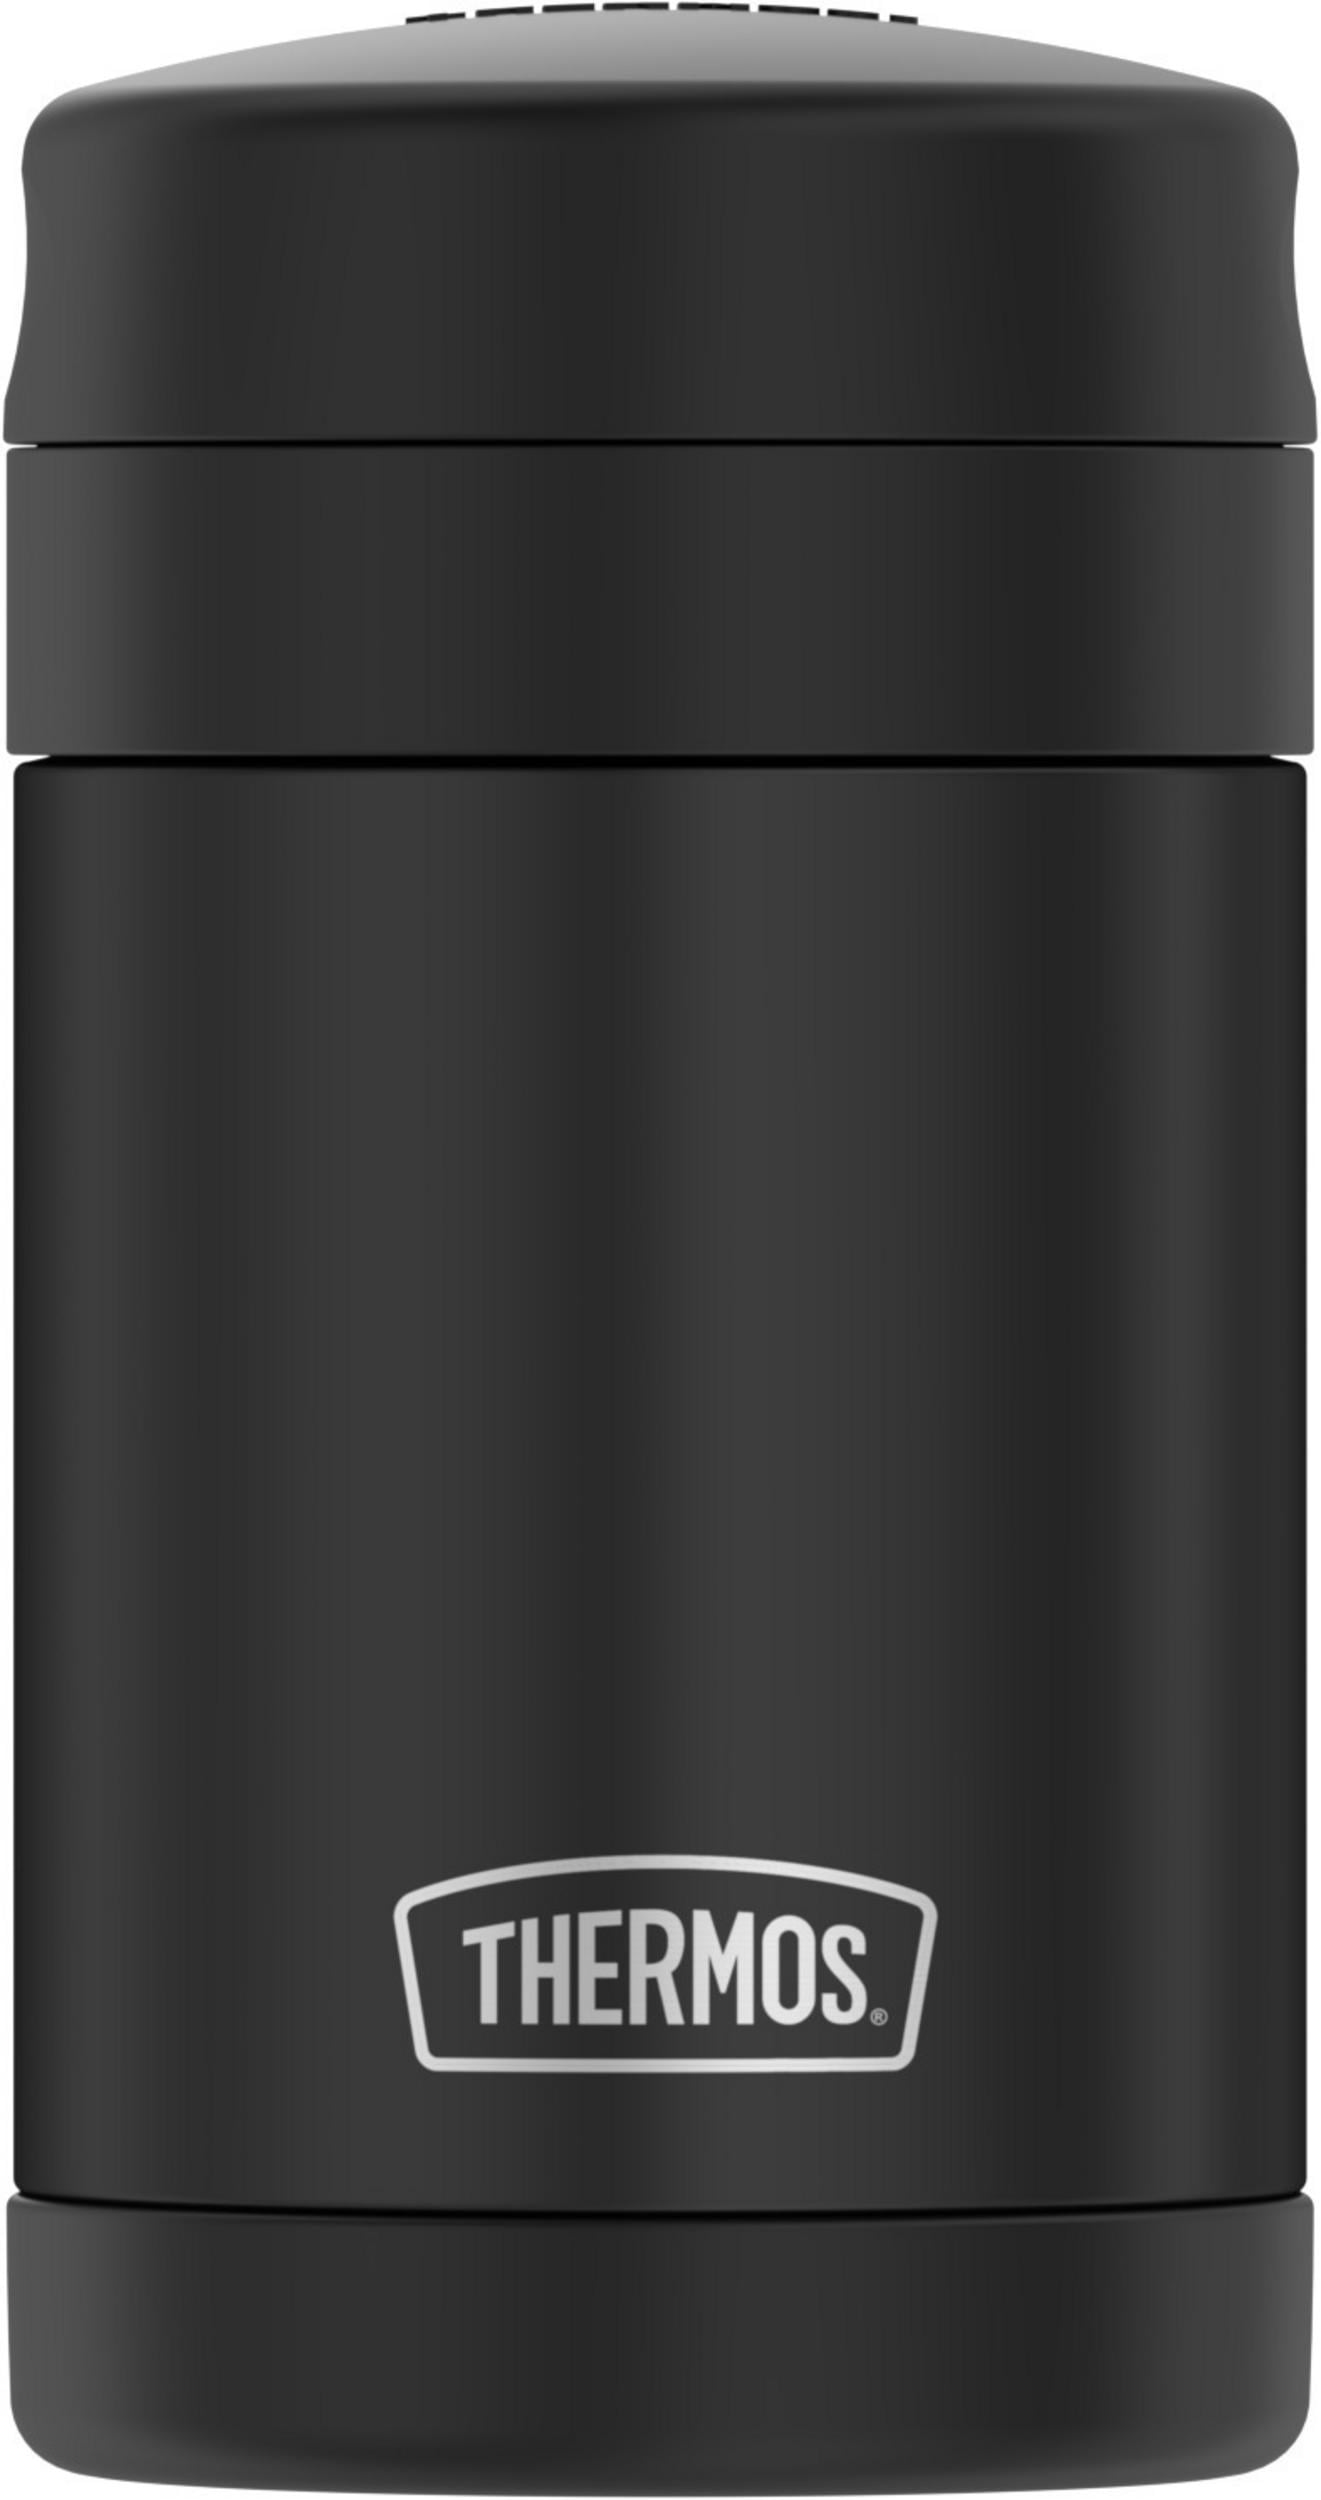 IRON °FLASK Thermos for Hot Food & Soup - 16oz Insulated Food Jar with  Foldable Spoon for Kids & Adults - Leak Proof, Stainless Steel, Storage,  Lunch